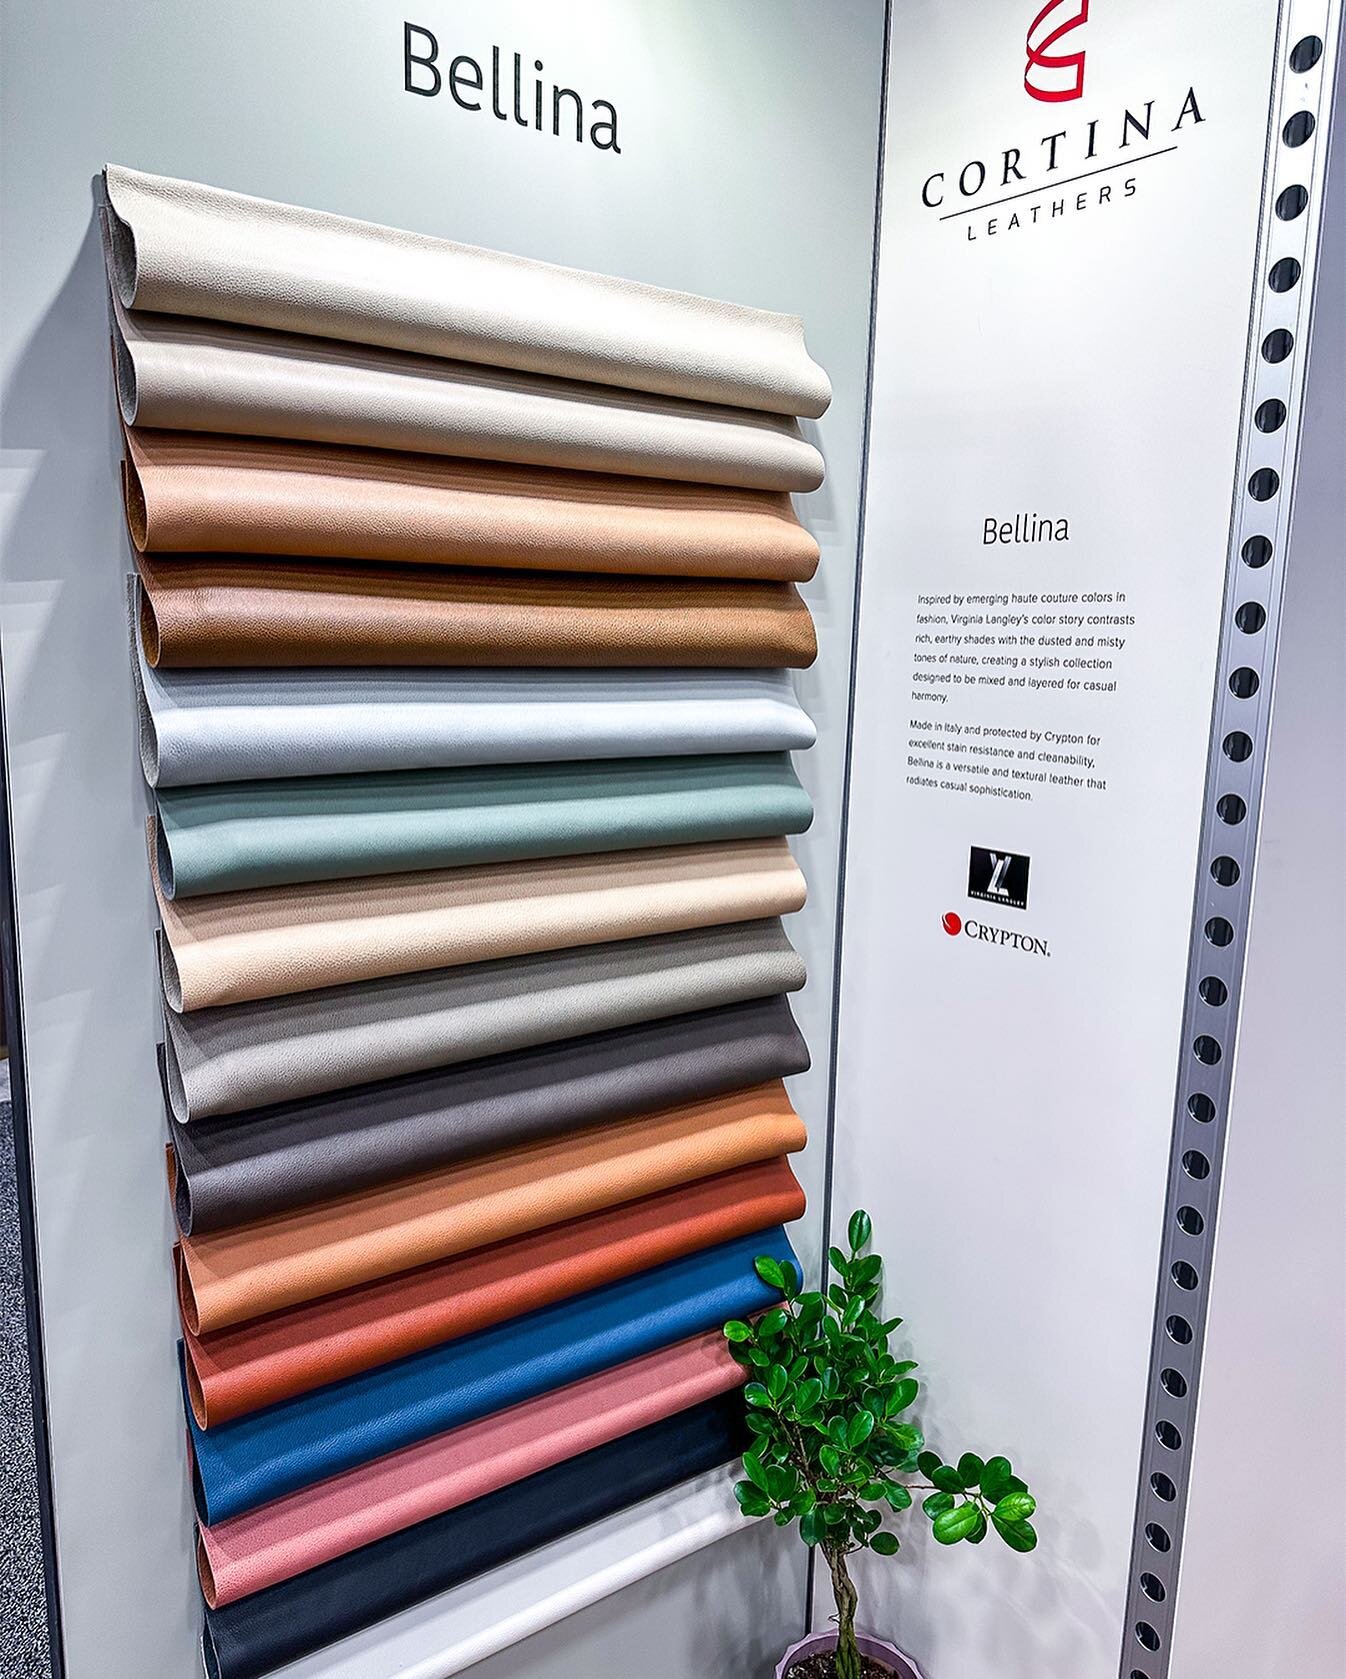 ICYMI @cortinaleathers new Bellina Collection

This stunning new collection of leathers focuses on a delicate color palette featuring lovely pastels designed by award winning designer Virginia Langley. Infused with Crypton protection, these leathers 